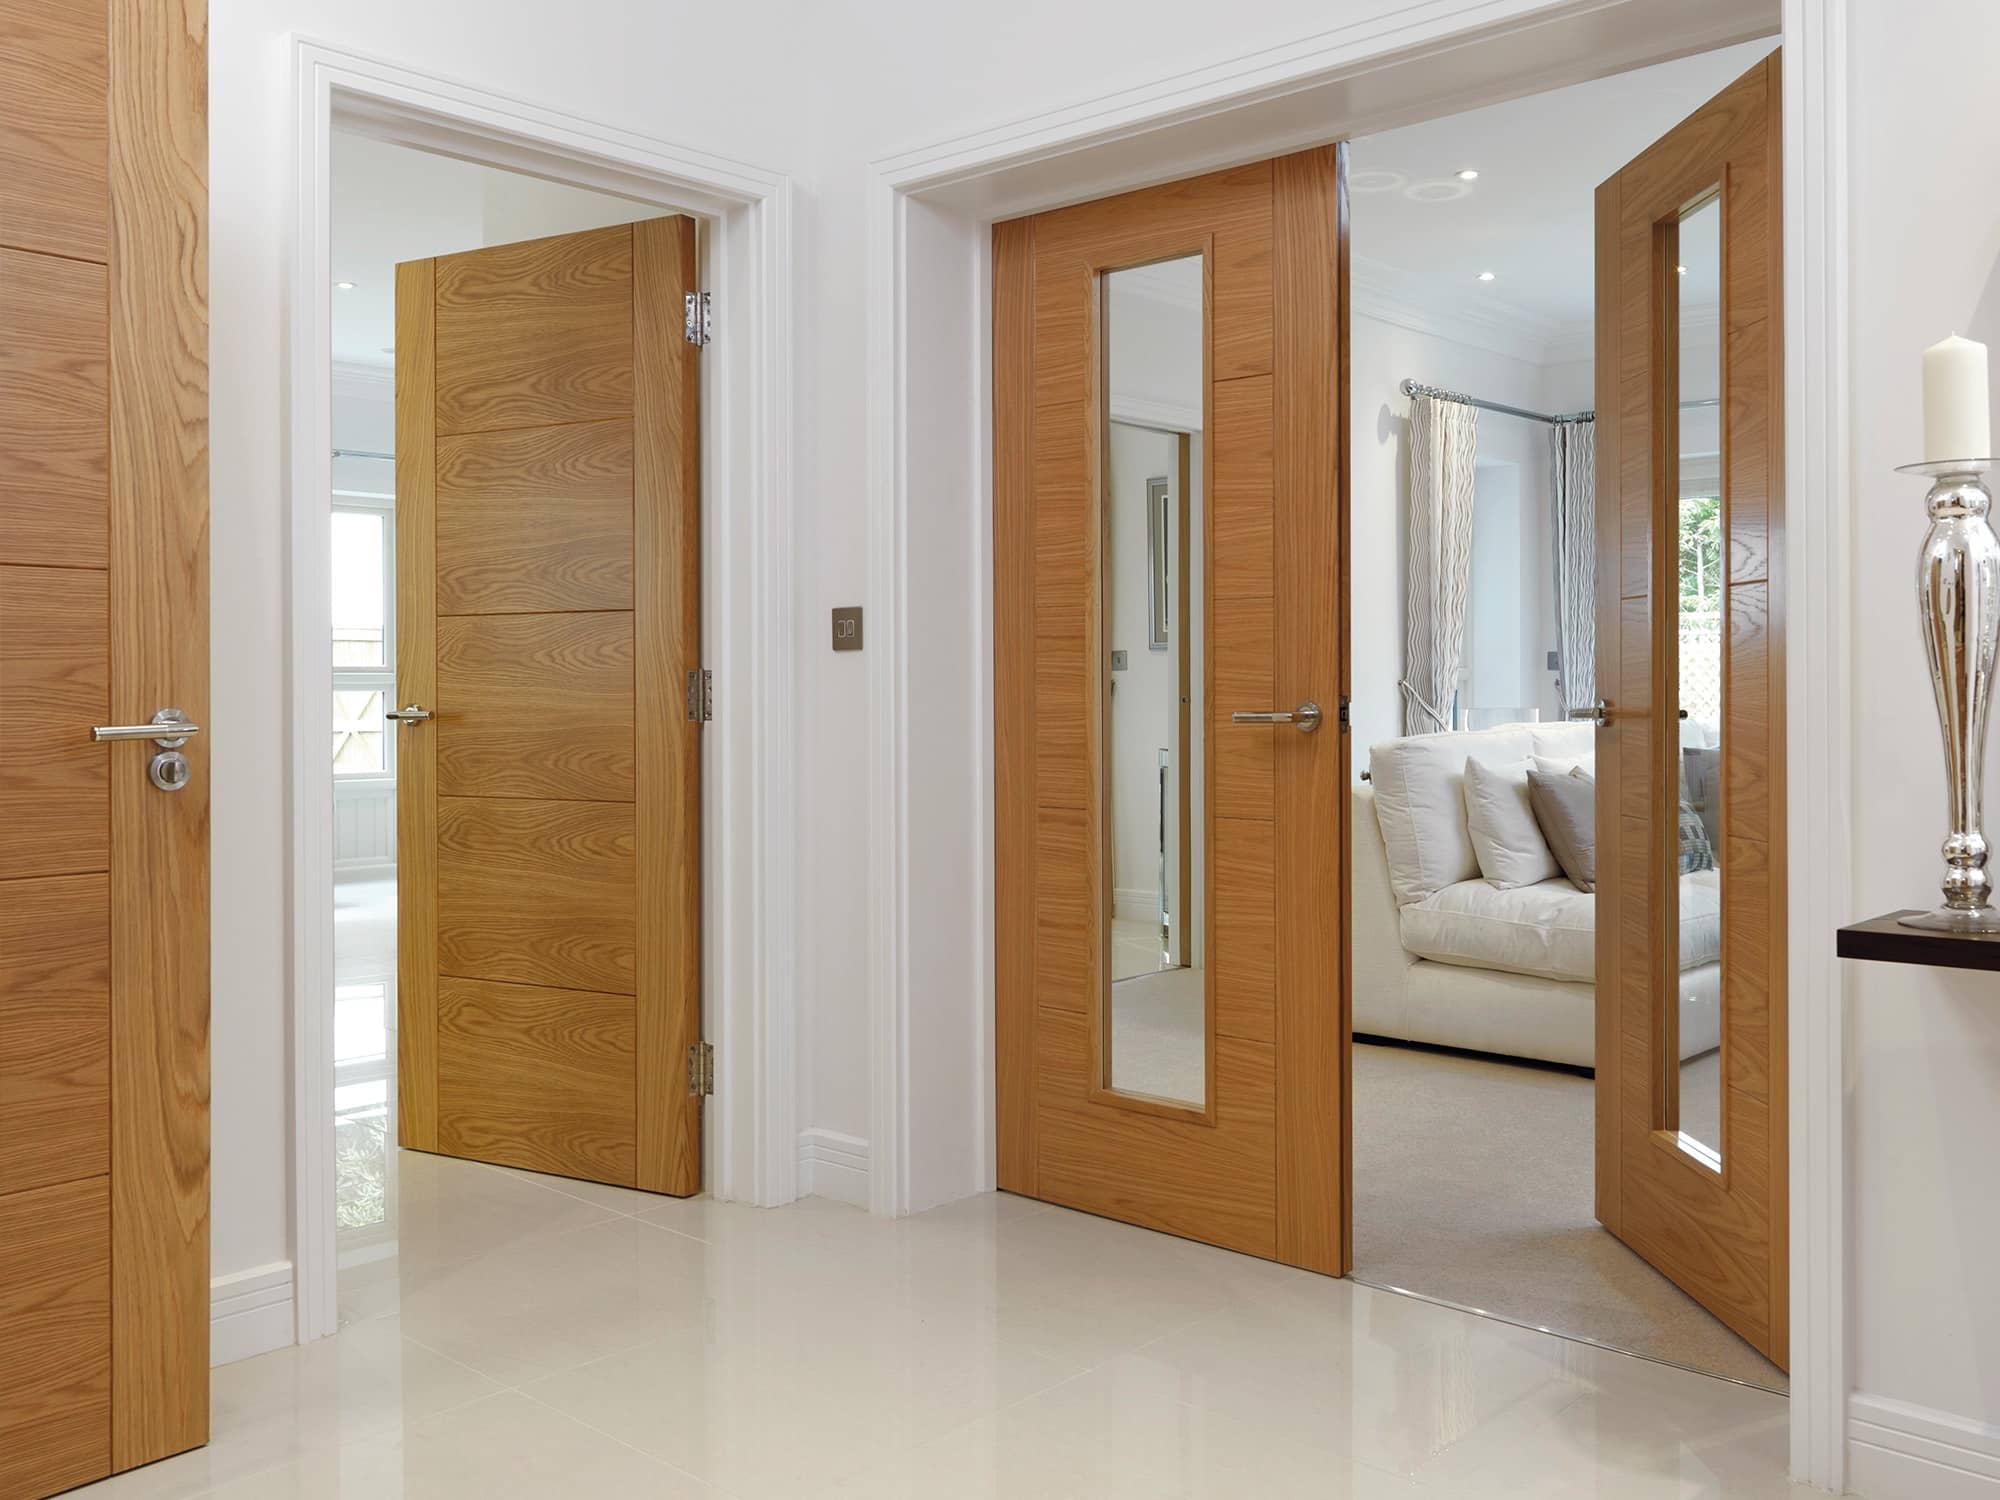 What should I consider when fitting hinges to FD30 fire doors